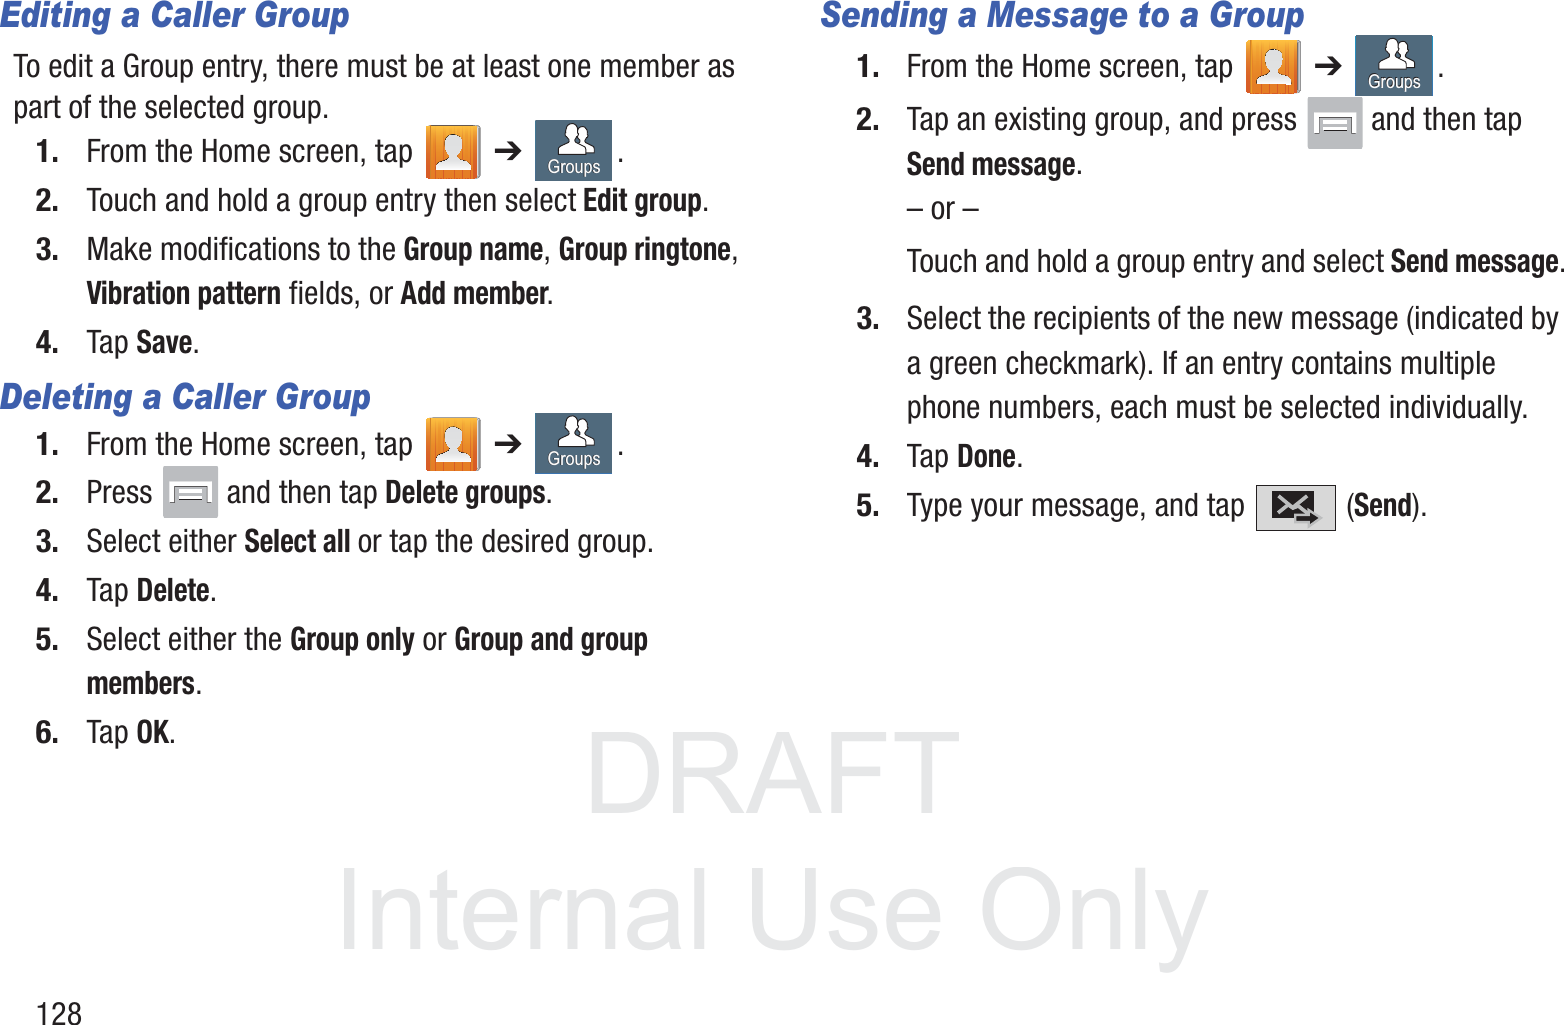 DRAFT InternalUse Only128Editing a Caller GroupTo edit a Group entry, there must be at least one member as part of the selected group.1. From the Home screen, tap   ➔ .2. Touch and hold a group entry then select Edit group.3. Make modifications to the Group name, Group ringtone, Vibration pattern fields, or Add member. 4. Tap Save.Deleting a Caller Group1. From the Home screen, tap   ➔ .2. Press   and then tap Delete groups.3. Select either Select all or tap the desired group. 4. Tap Delete.5. Select either the Group only or Group and group members.6. Tap OK.Sending a Message to a Group 1. From the Home screen, tap   ➔ .2. Tap an existing group, and press   and then tap Send message. – or –Touch and hold a group entry and select Send message.3. Select the recipients of the new message (indicated by a green checkmark). If an entry contains multiple phone numbers, each must be selected individually.4. Tap Done.5. Type your message, and tap   (Send).GroupsGroupsGroupsGroupsGroupsGroups